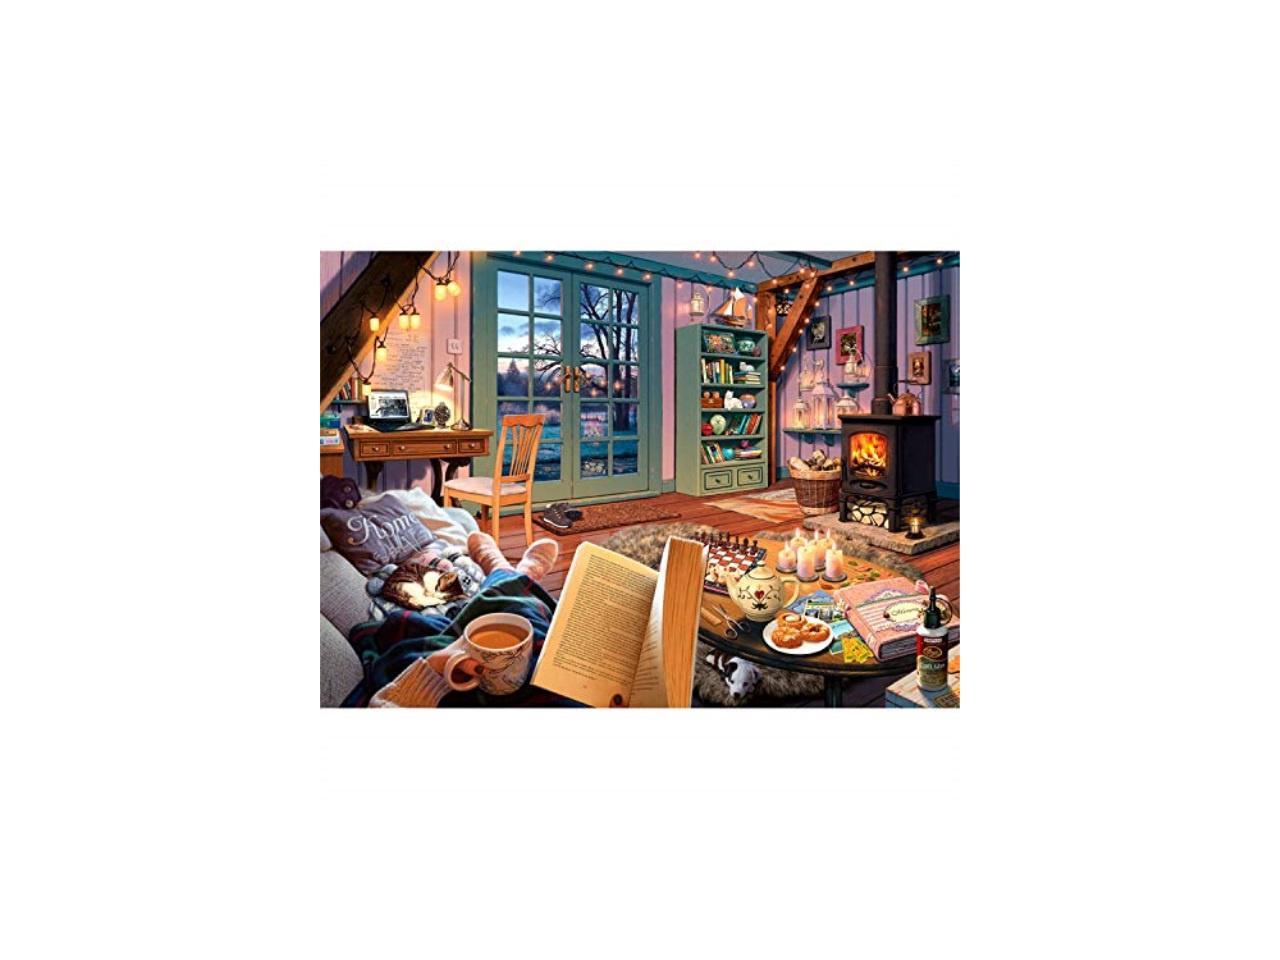 Details about   Cozy bachelor house with pets and girlfriend Jigsaw puzzle 500 pieces boardgame 